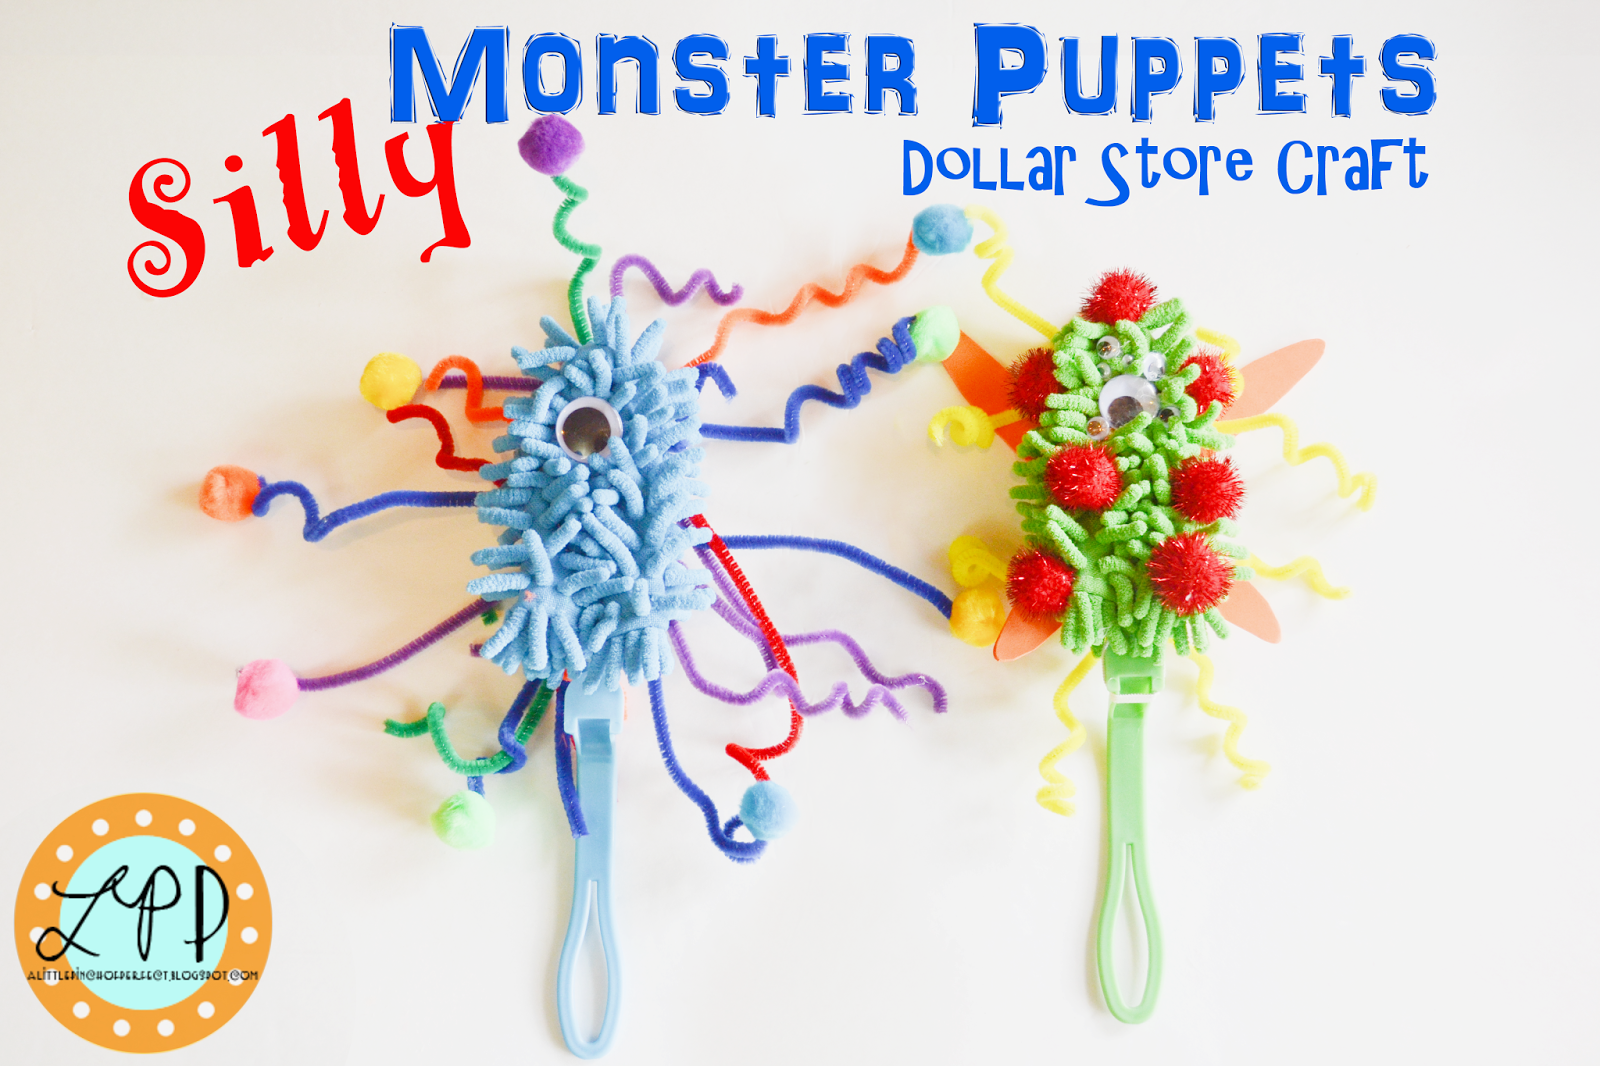 Silly Monster Puppets Dollar Store Craft